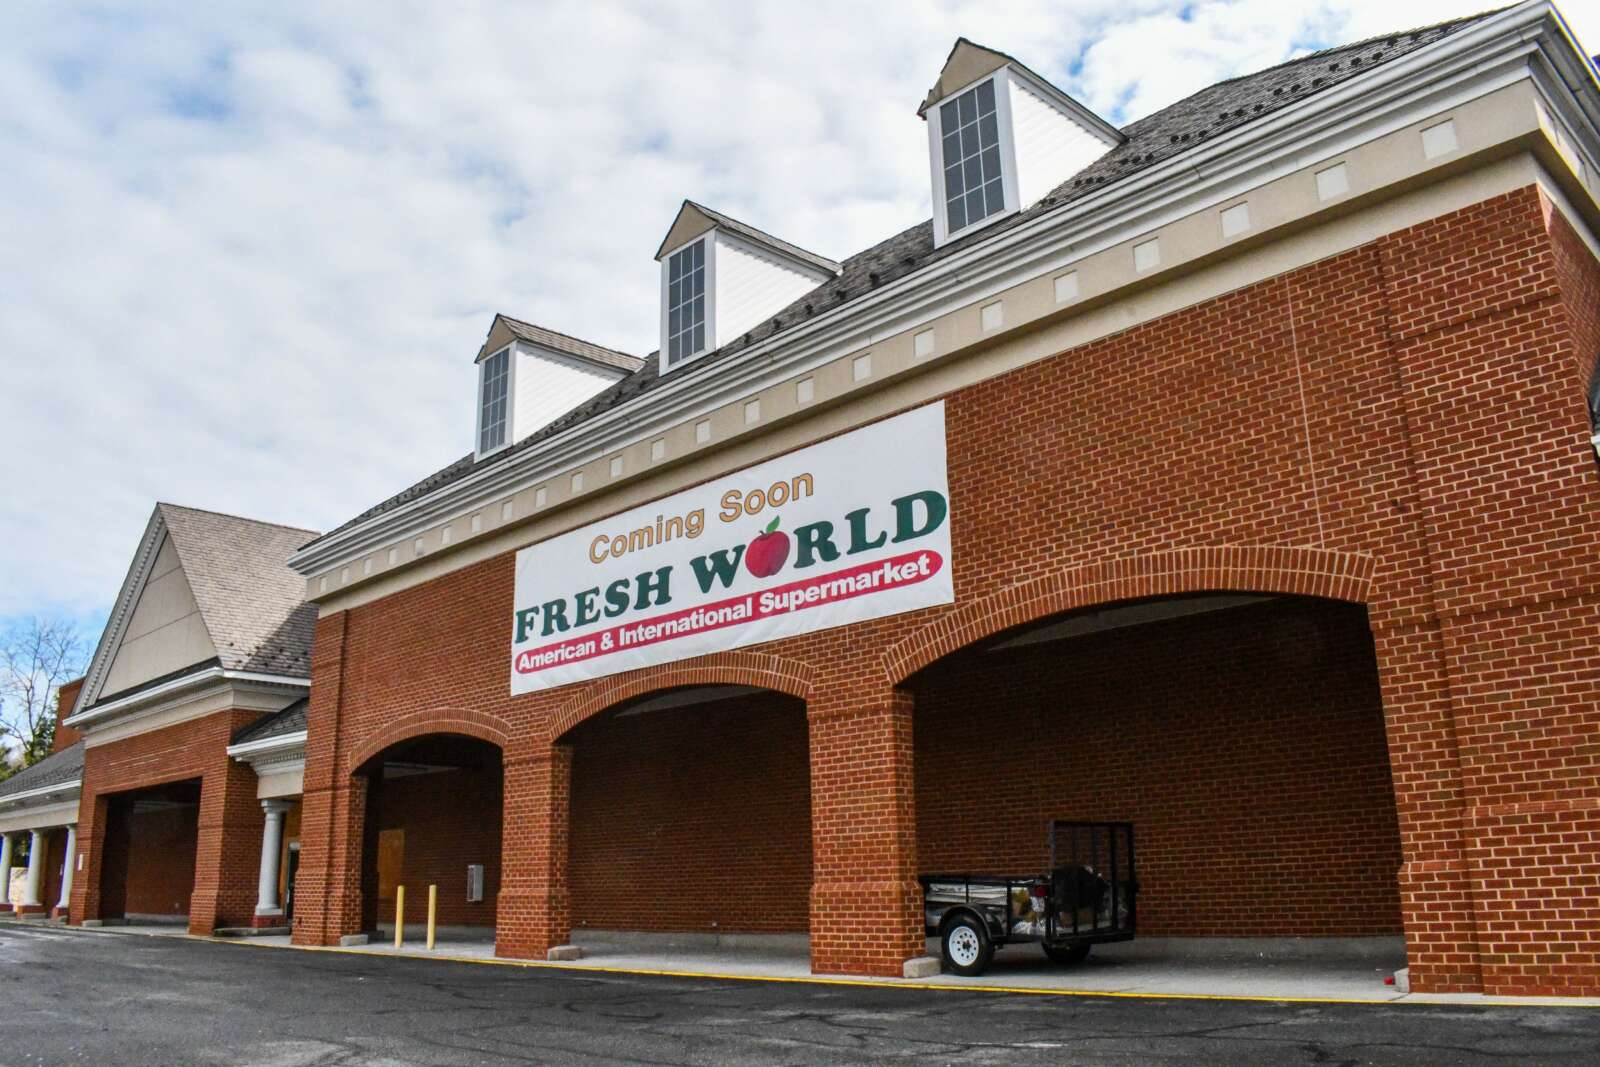 Fresh World, an international grocery store chain, scheduled to open this fall in Mount Vernon